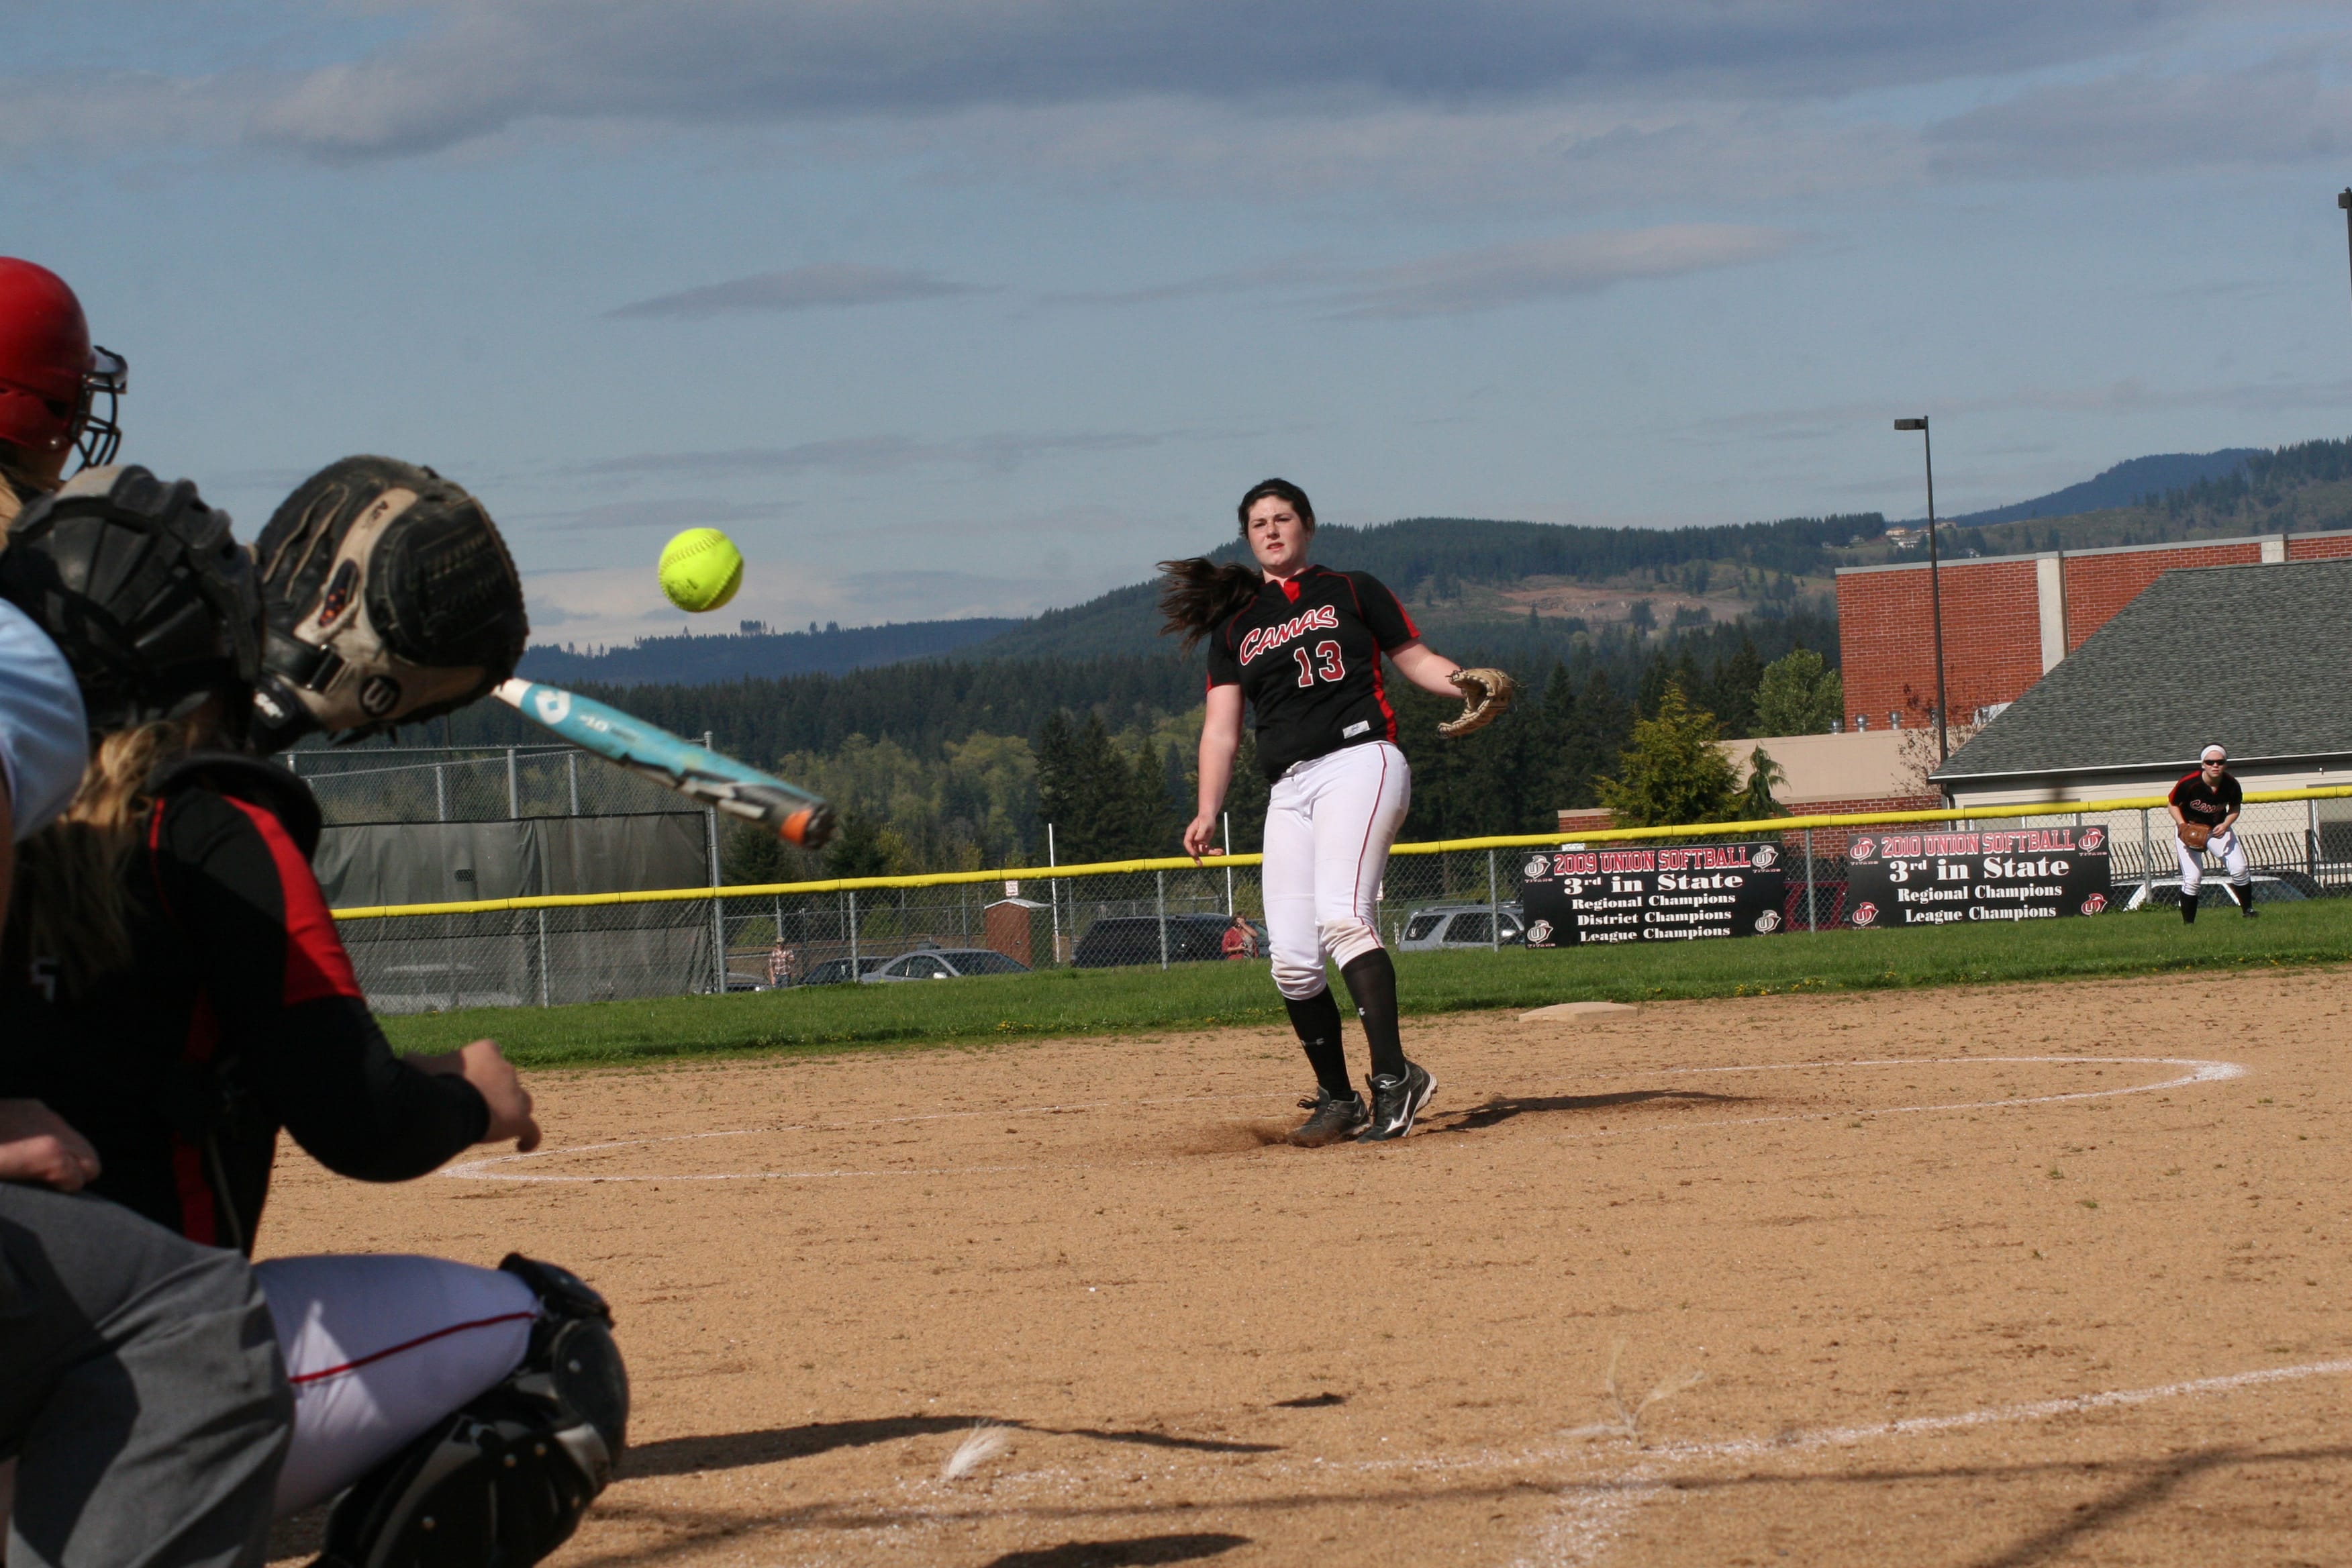 Harli Hubbard celebrated her 17th birthday by striking out 13 Union Titans on April 22. The Camas High School junior allowed only two hits and two walks in seven innings pitched.